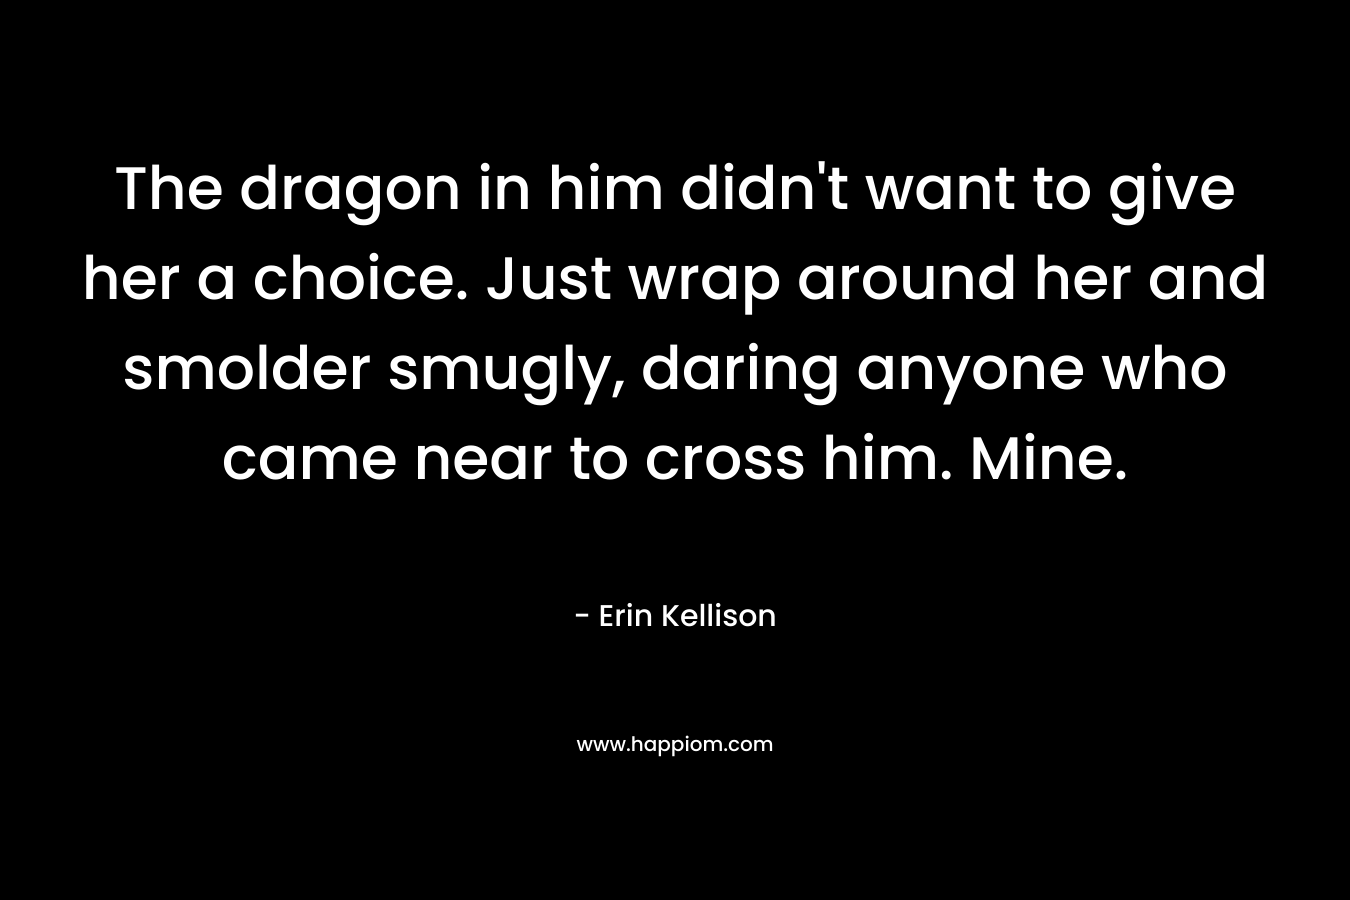 The dragon in him didn't want to give her a choice. Just wrap around her and smolder smugly, daring anyone who came near to cross him. Mine.